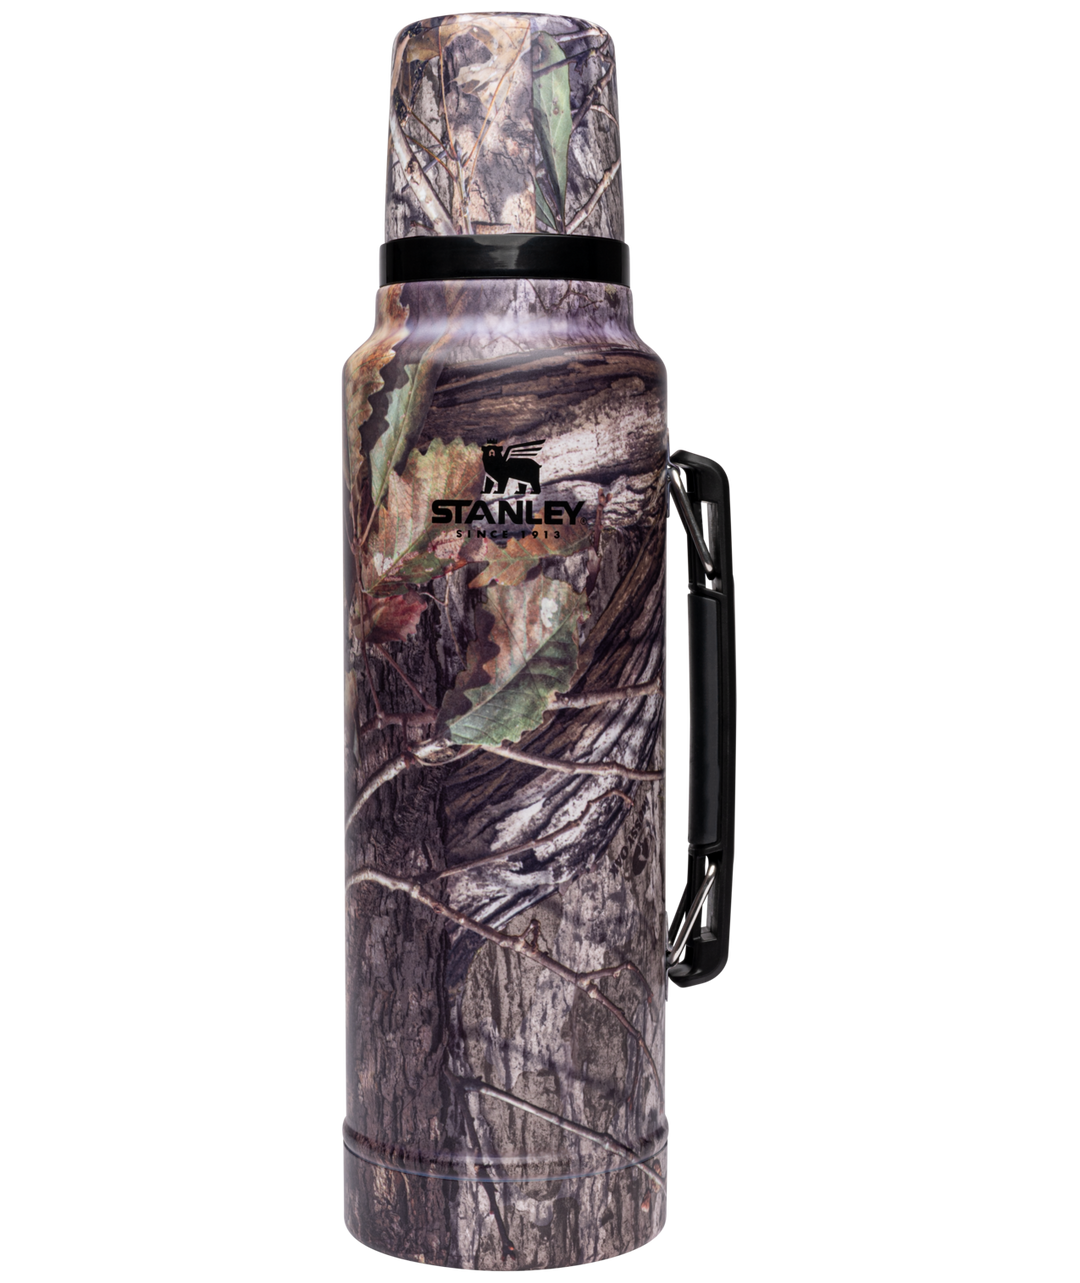 Mossy Oak Country DNA